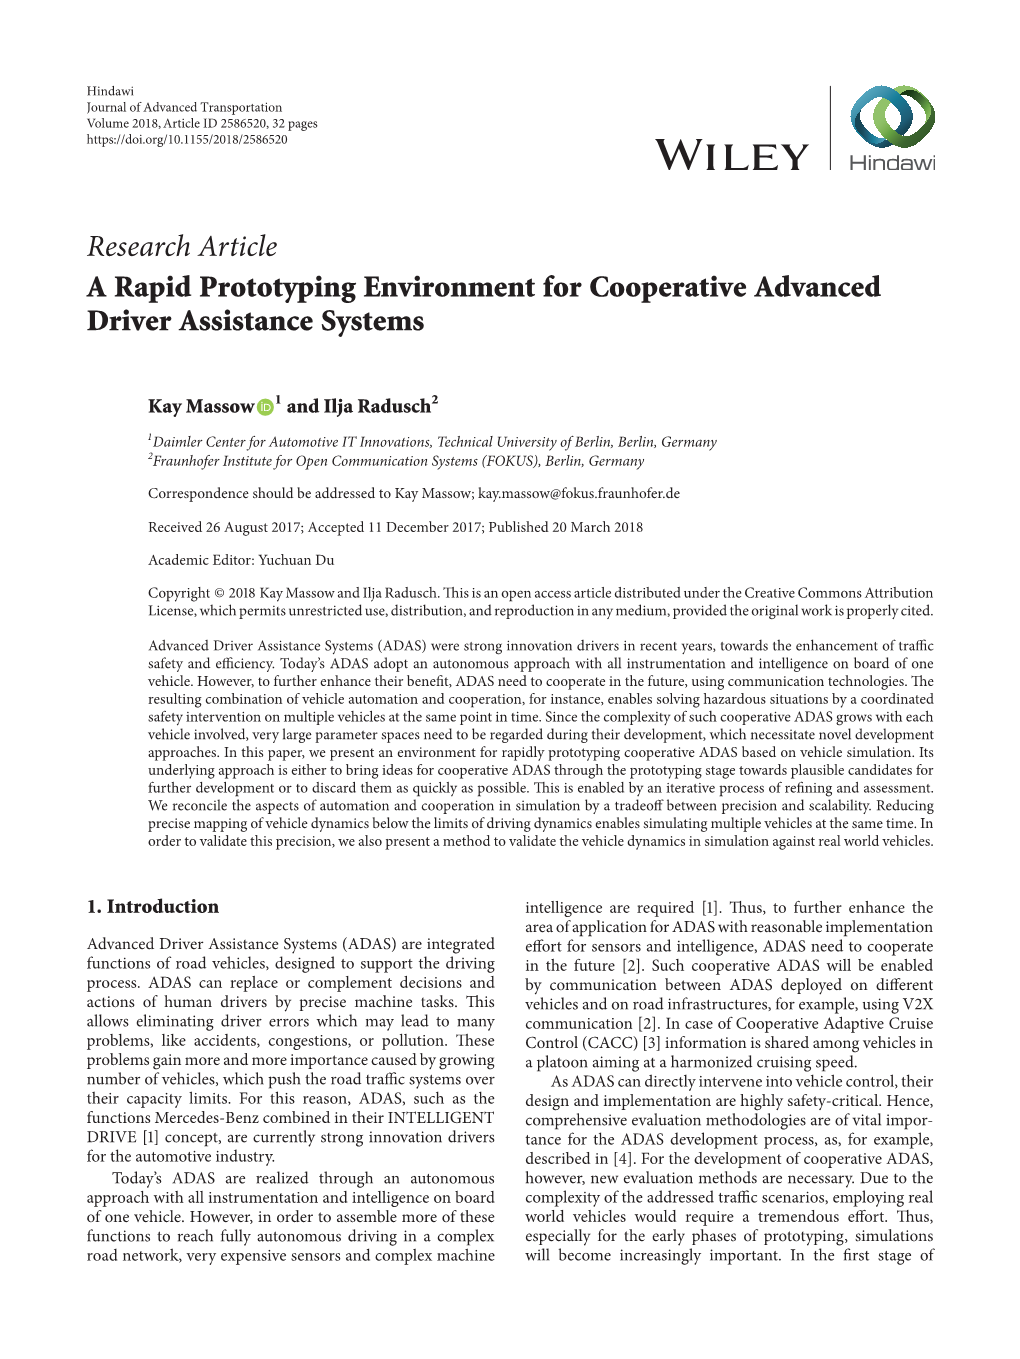 Research Article a Rapid Prototyping Environment for Cooperative Advanced Driver Assistance Systems